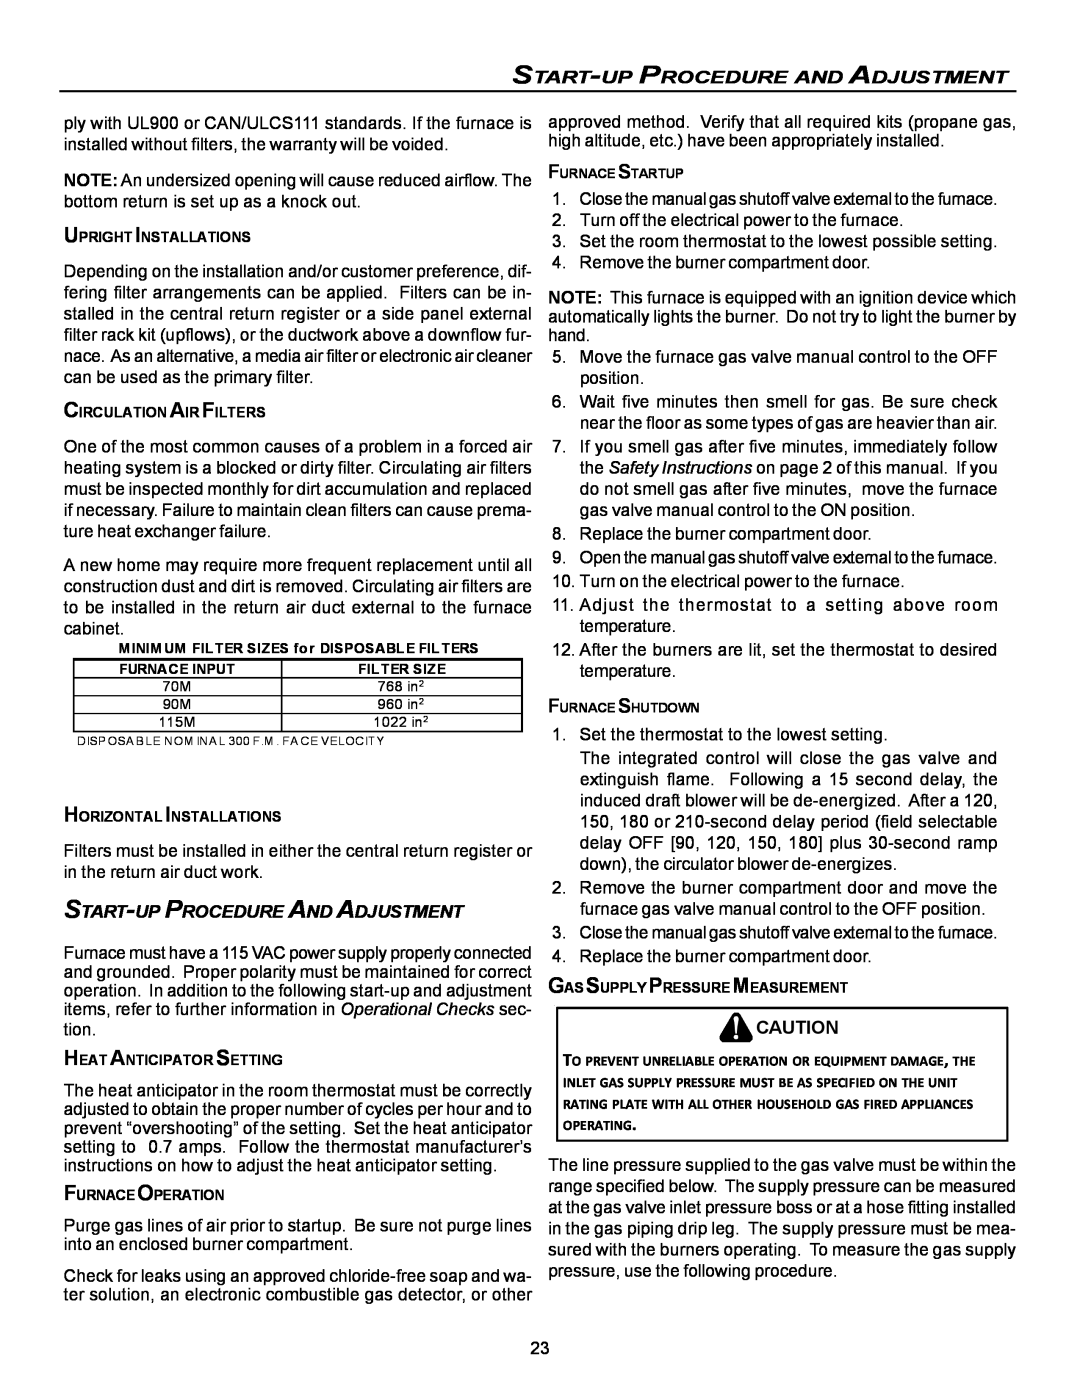 Goodman Mfg VC8 instruction manual Start-Up Procedure And Adjustment, Turn off the electrical power to the furnace 